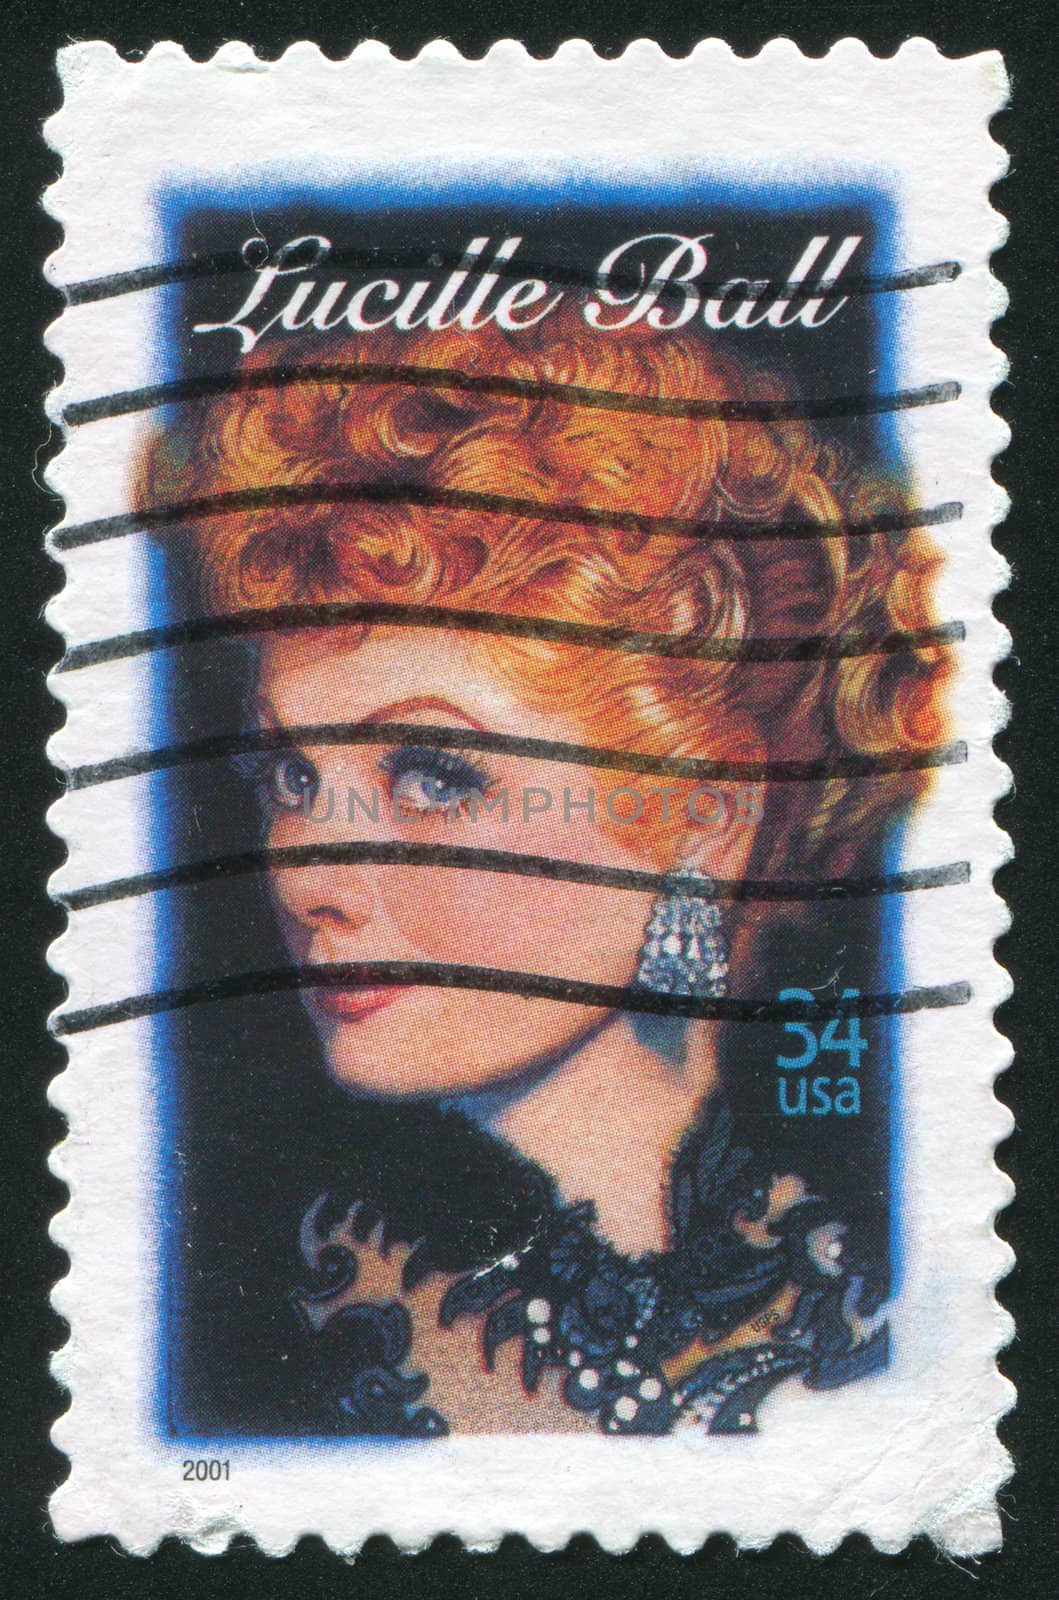 UNITED STATES - CIRCA 2001: stamp printed by United states, shows Lucille Ball, circa 2001